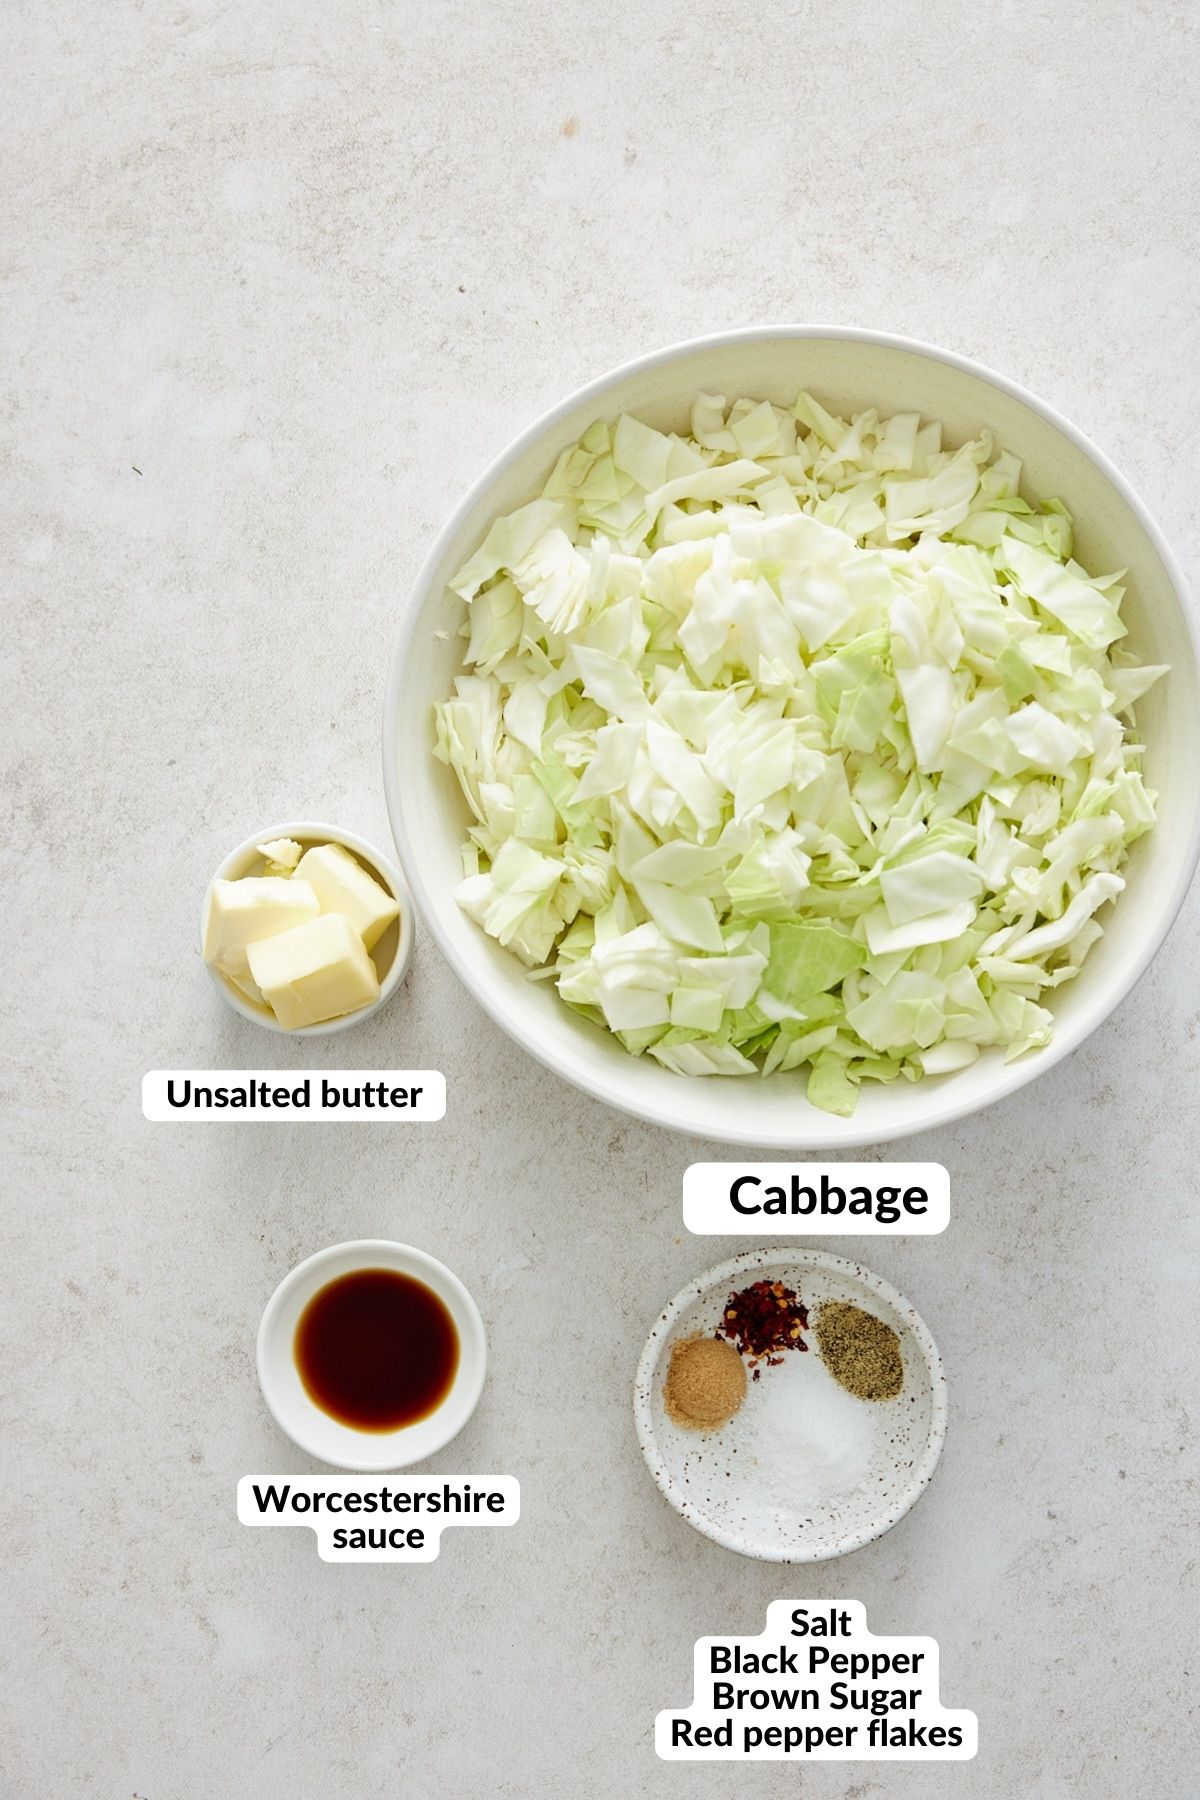 ingredients with labels for fried cabbage recipe in small white bowls on a white background